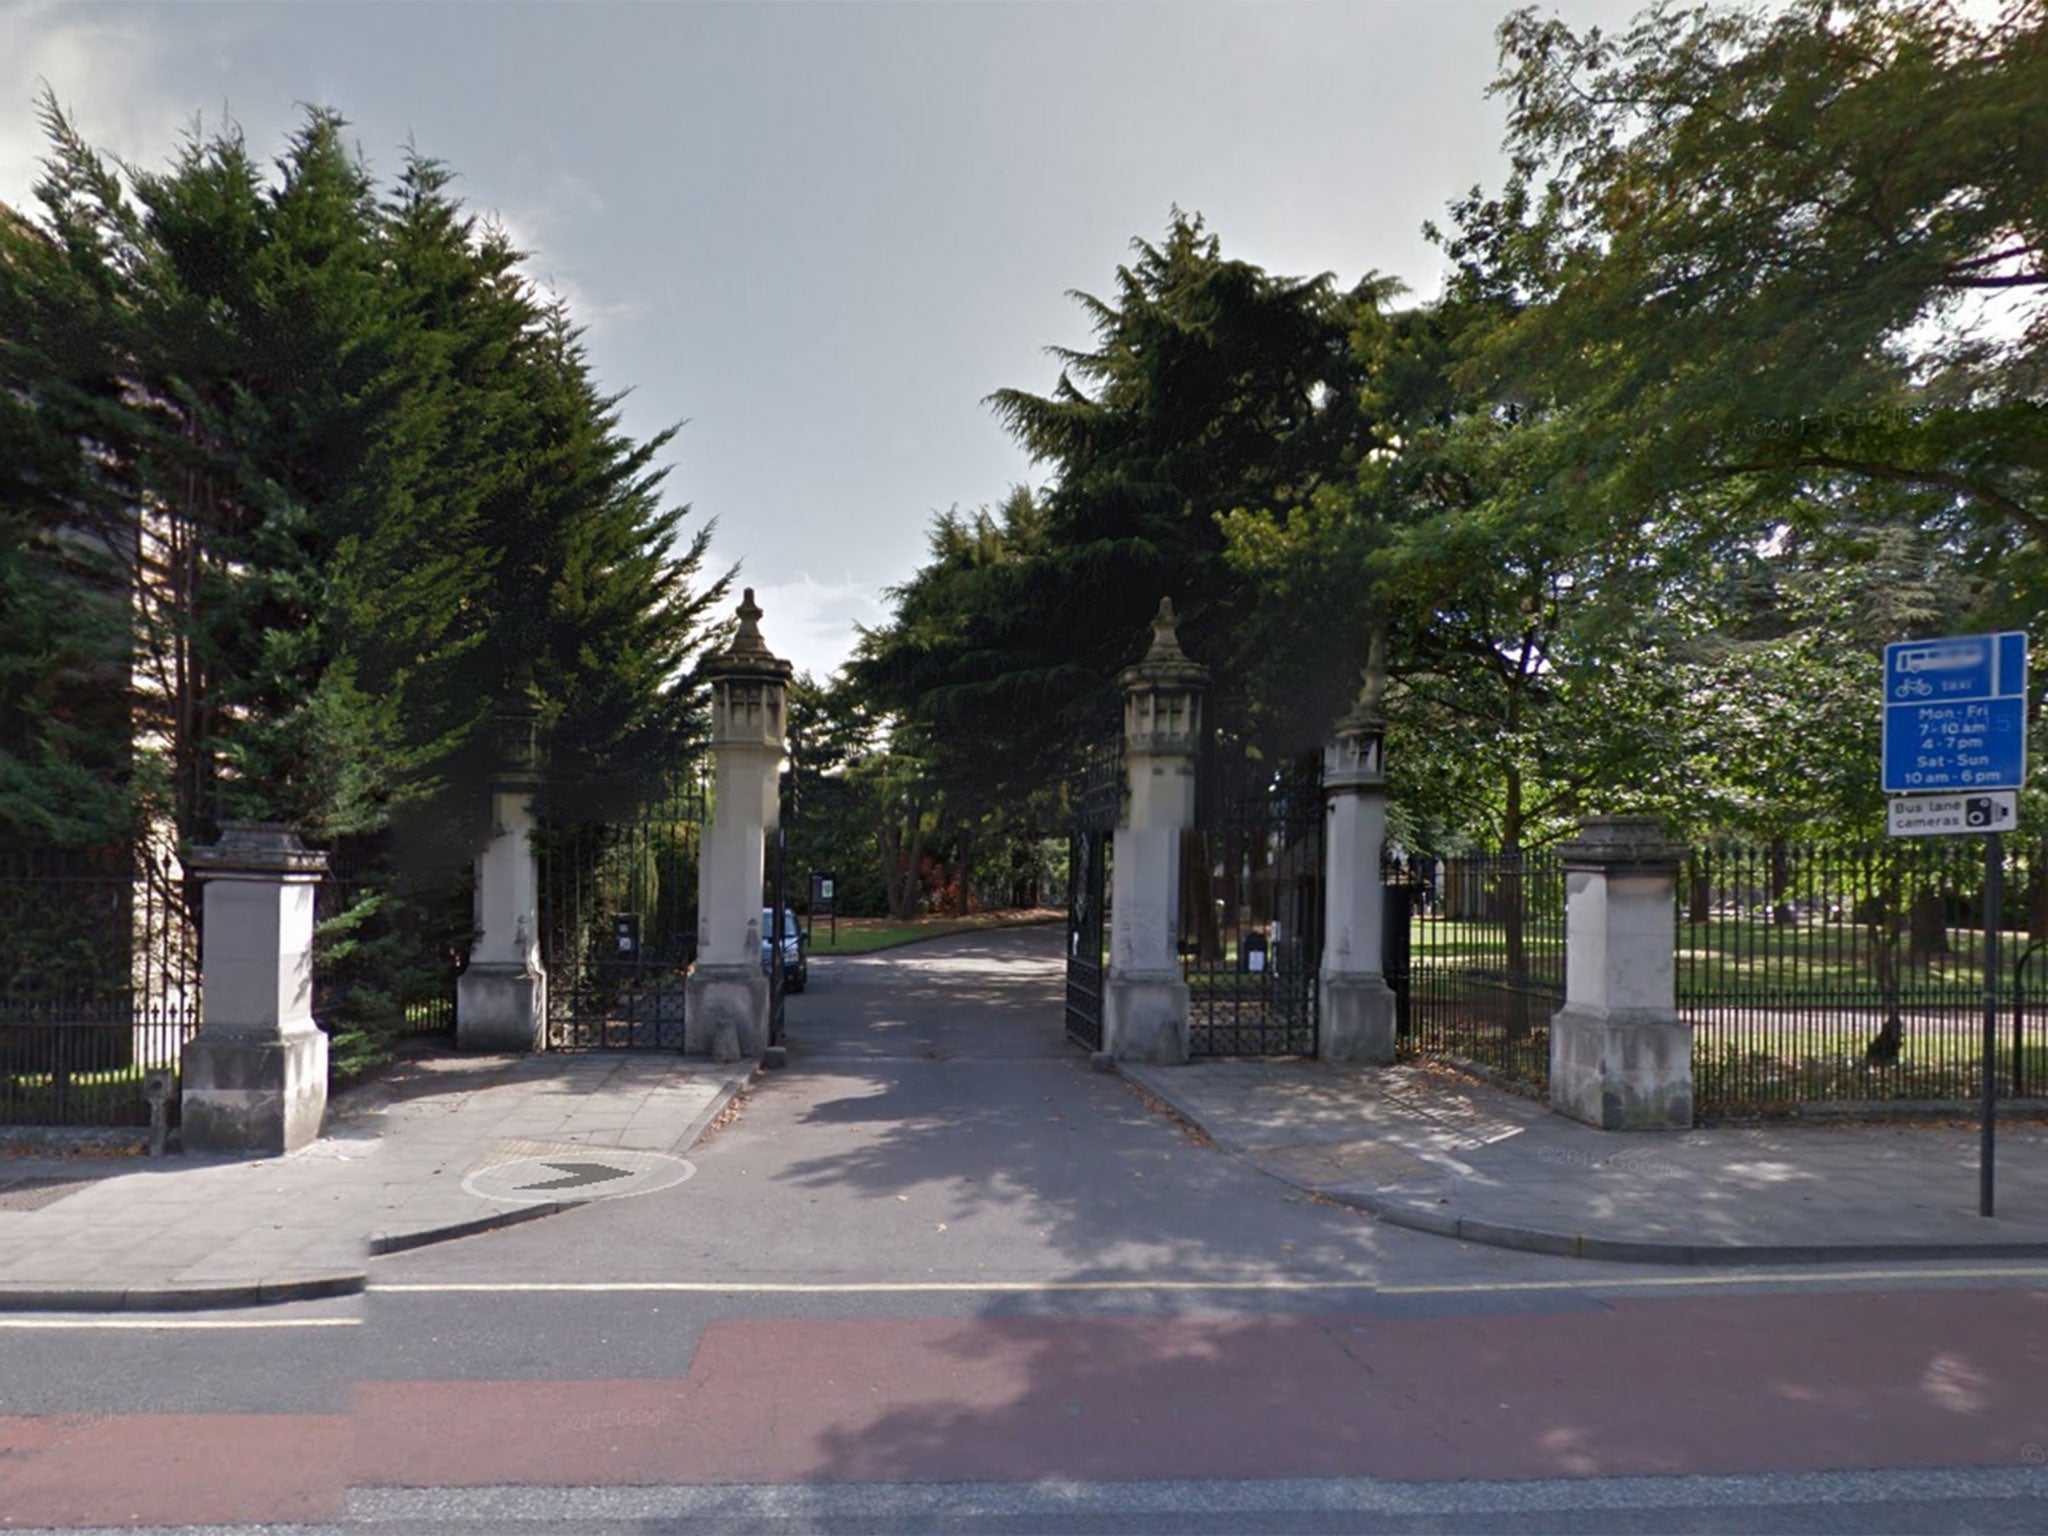 A 73-year-old woman was robbed and injured in Hanwell Cemetery, Ealing, as she tended her late husband’s grave